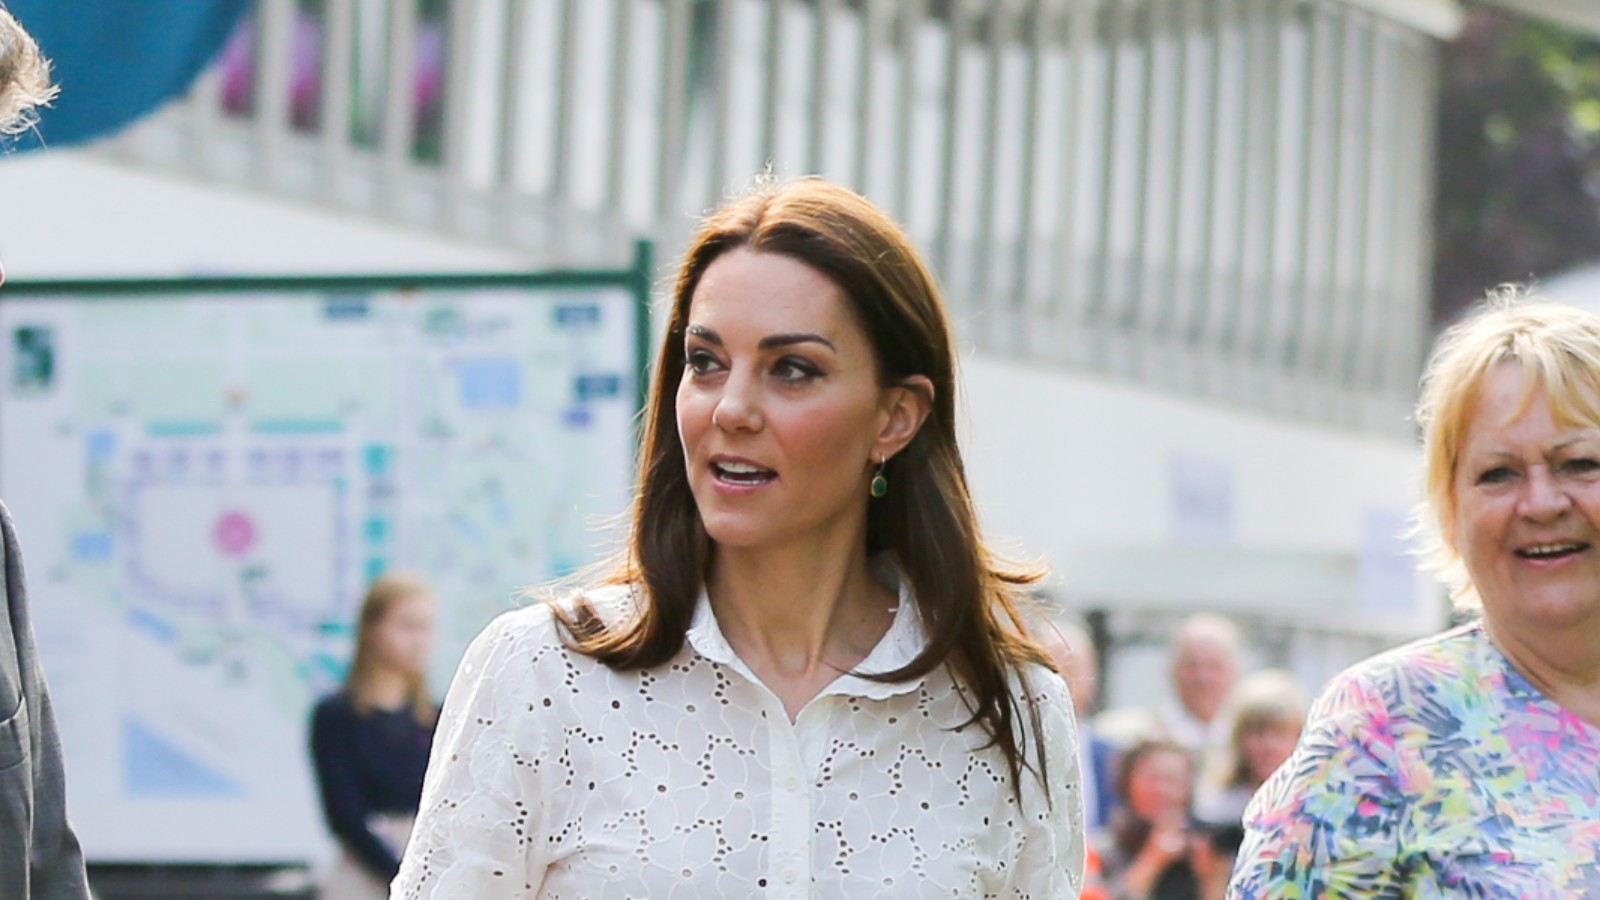 Kate Middleton's white lace blouse and skinny jeans in new